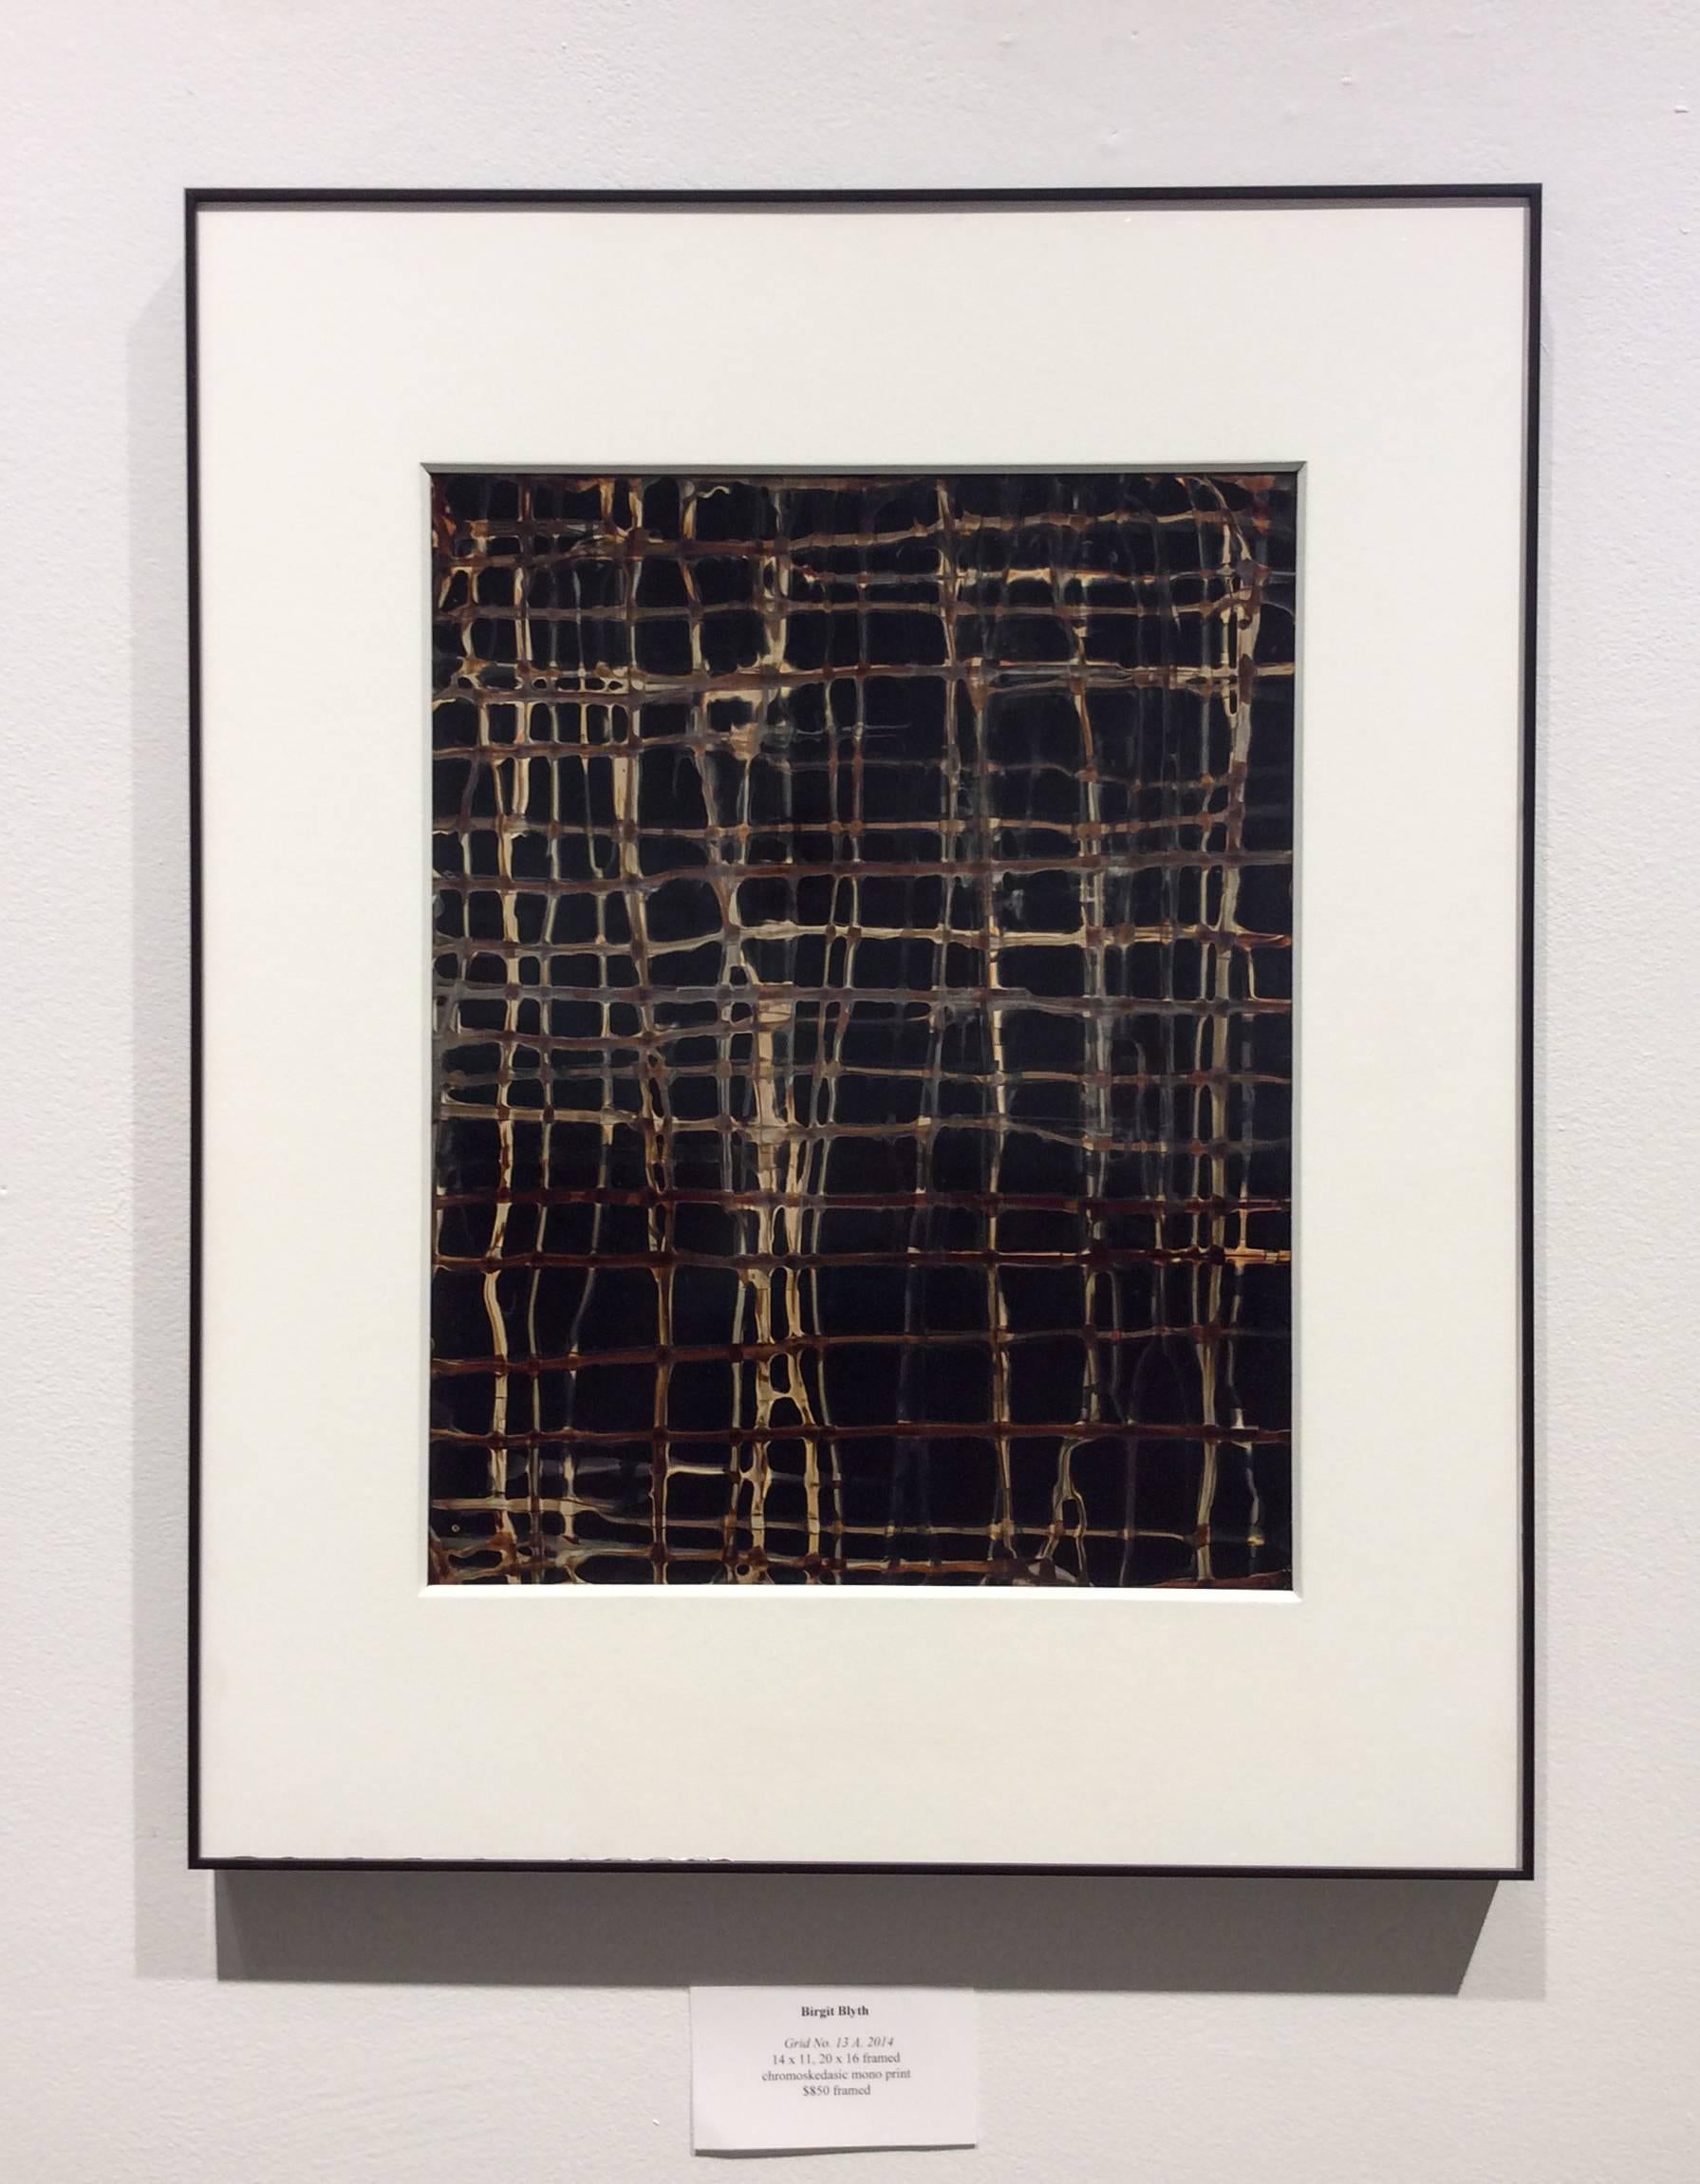 Grid. No 13A (Contemporary Framed Abstract Camera-Less Photo in Black & Coffee) - Photograph by Birgit Blyth